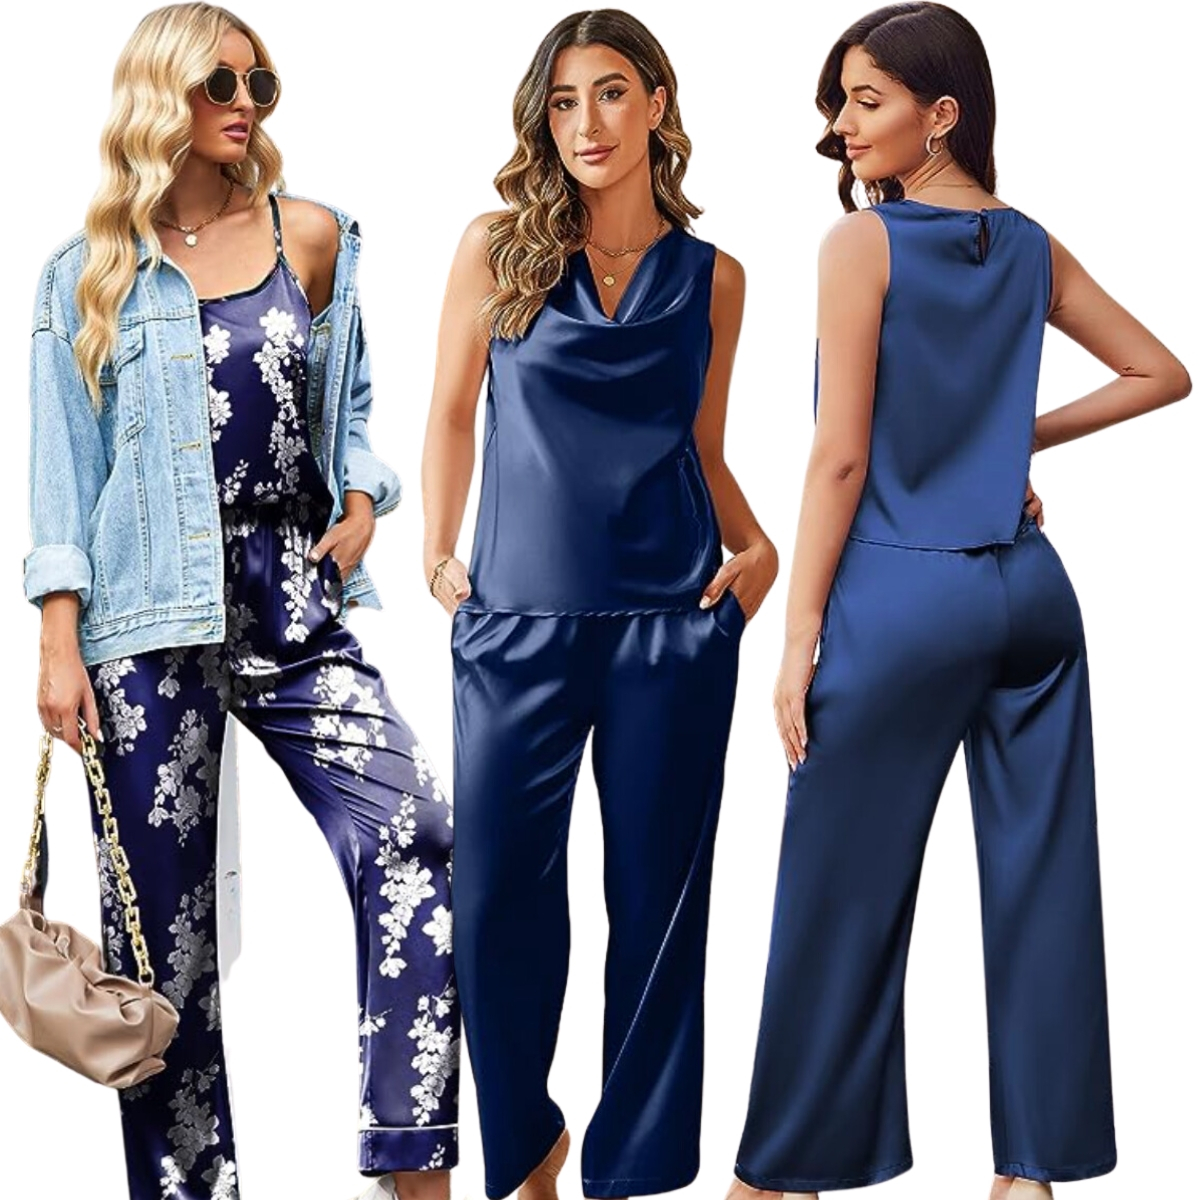 11 Daytime Pajama Outfits You Can Wear in Public